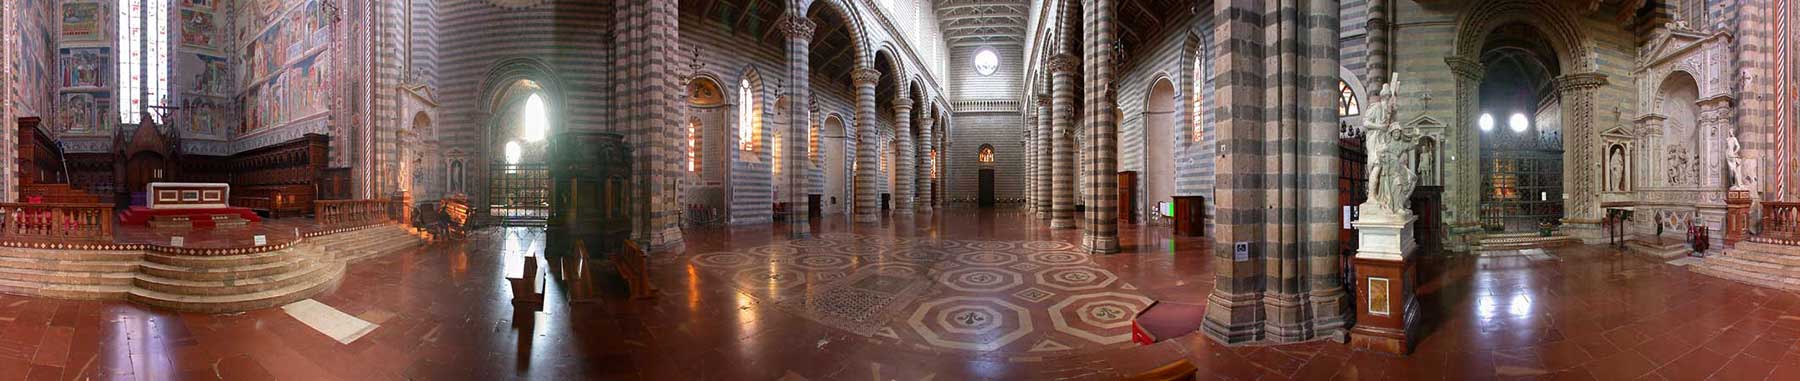 inside of the Cathedral of Orvieto